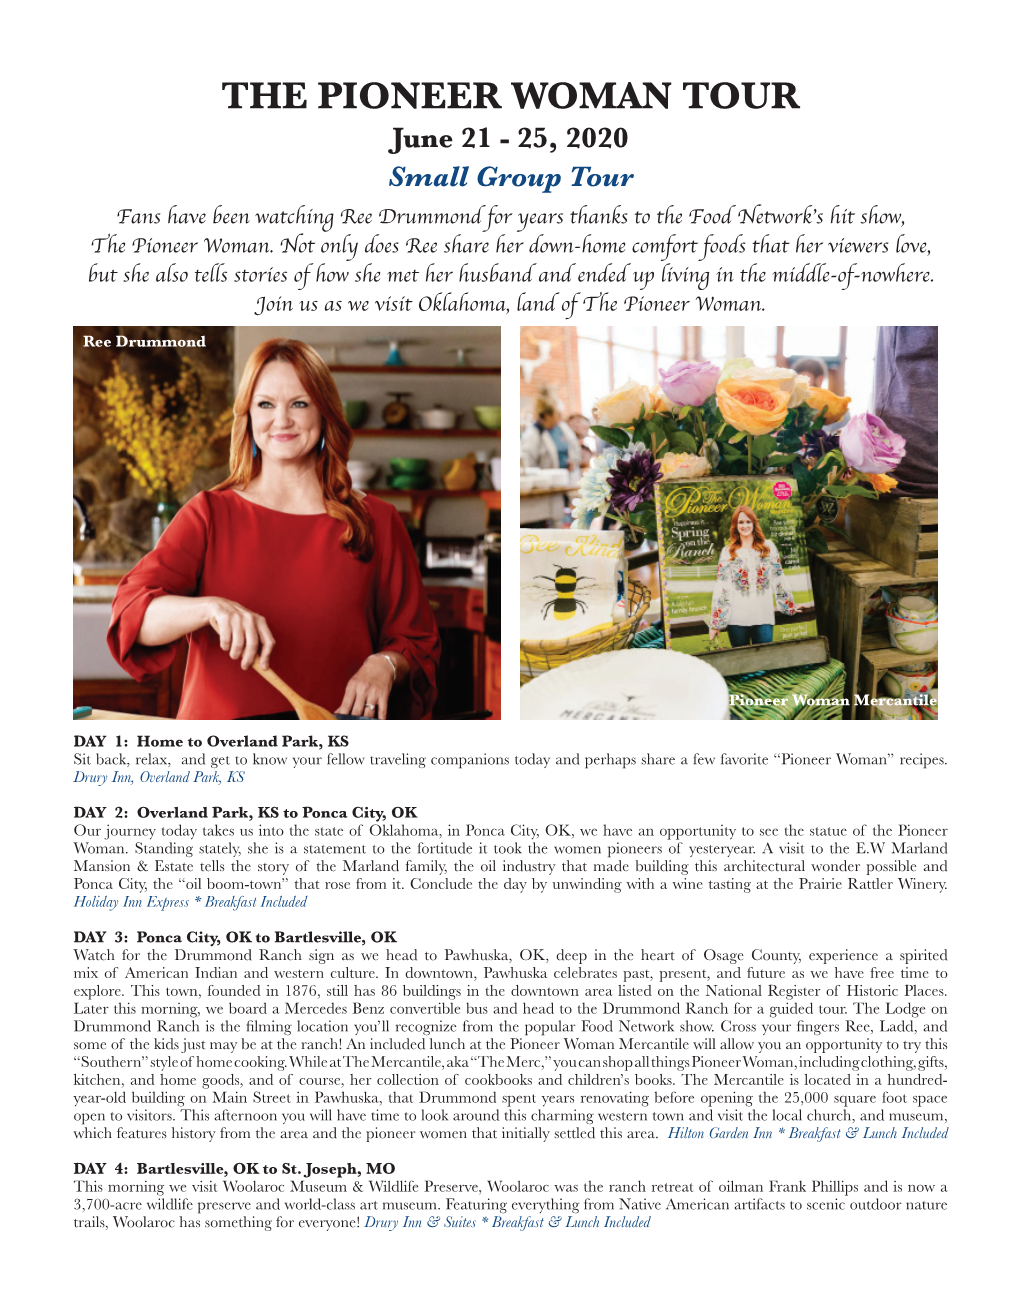 THE PIONEER WOMAN TOUR June 21 - 25, 2020 Small Group Tour Fans Have Been Watching Ree Drummond for Years Thanks to the Food Network’S Hit Show, the Pioneer Woman